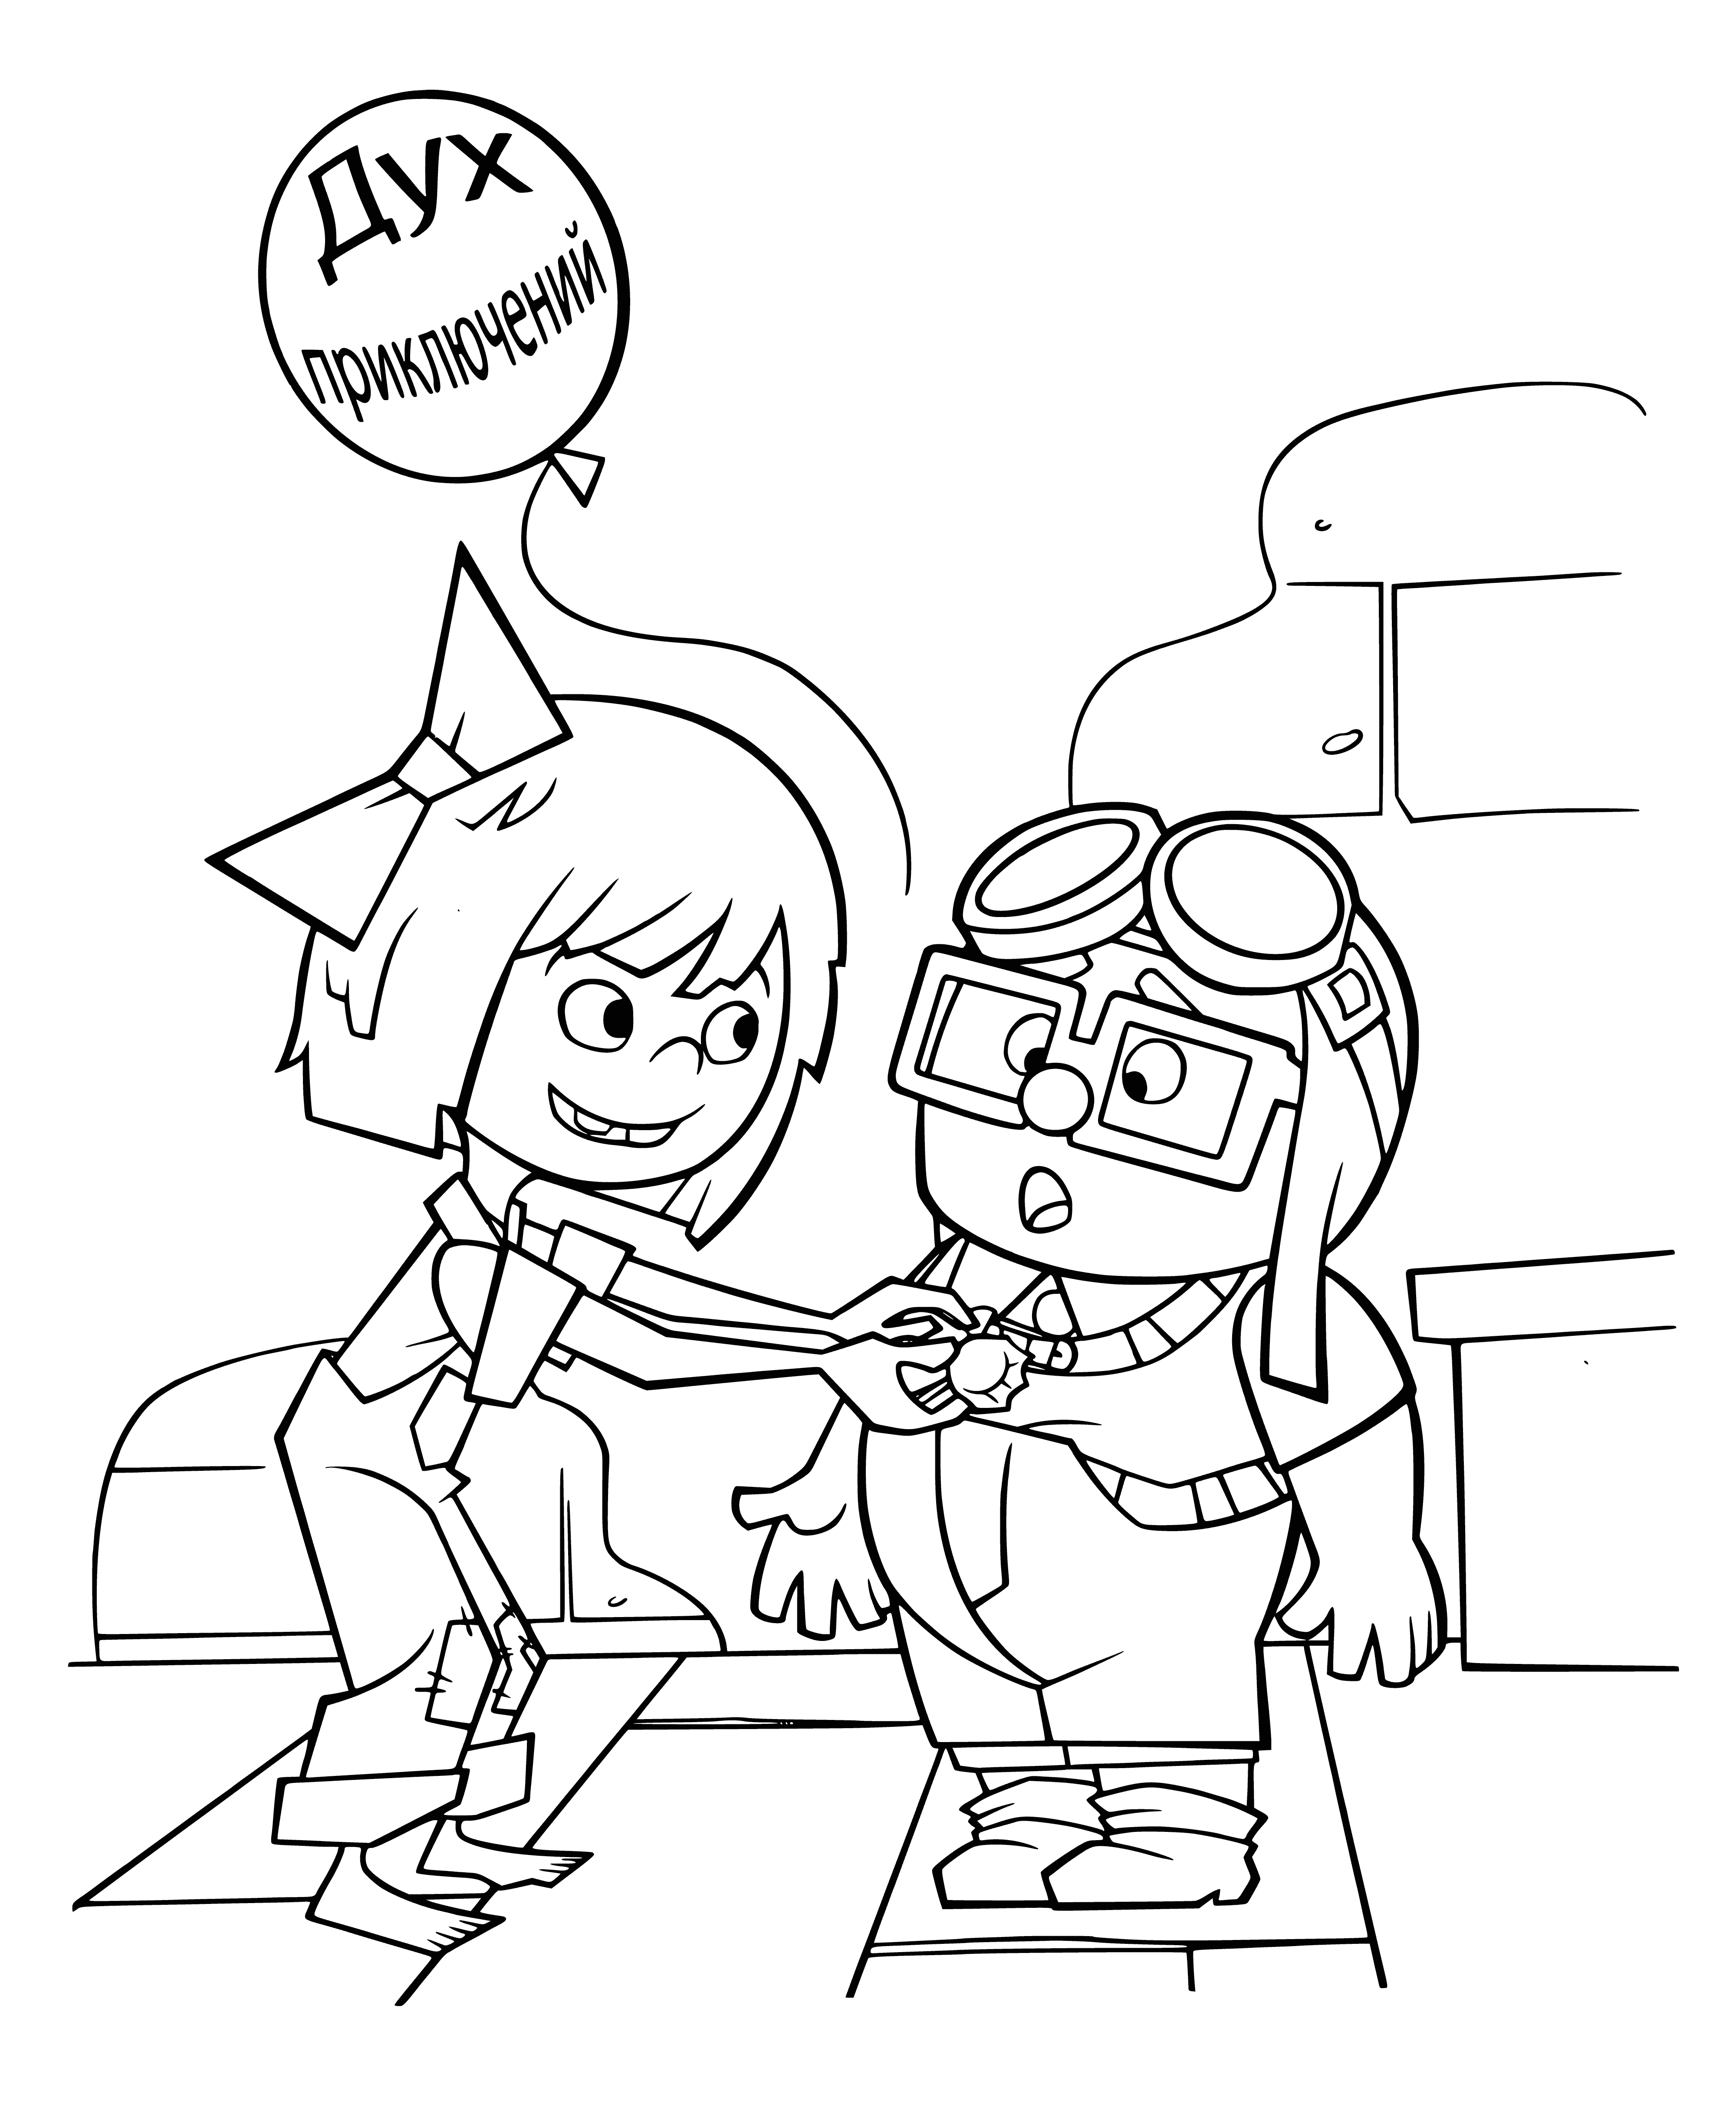 coloring page: Small, round, light brown object with a hole in the center; smooth, slightly convex, slightly shiny surface.